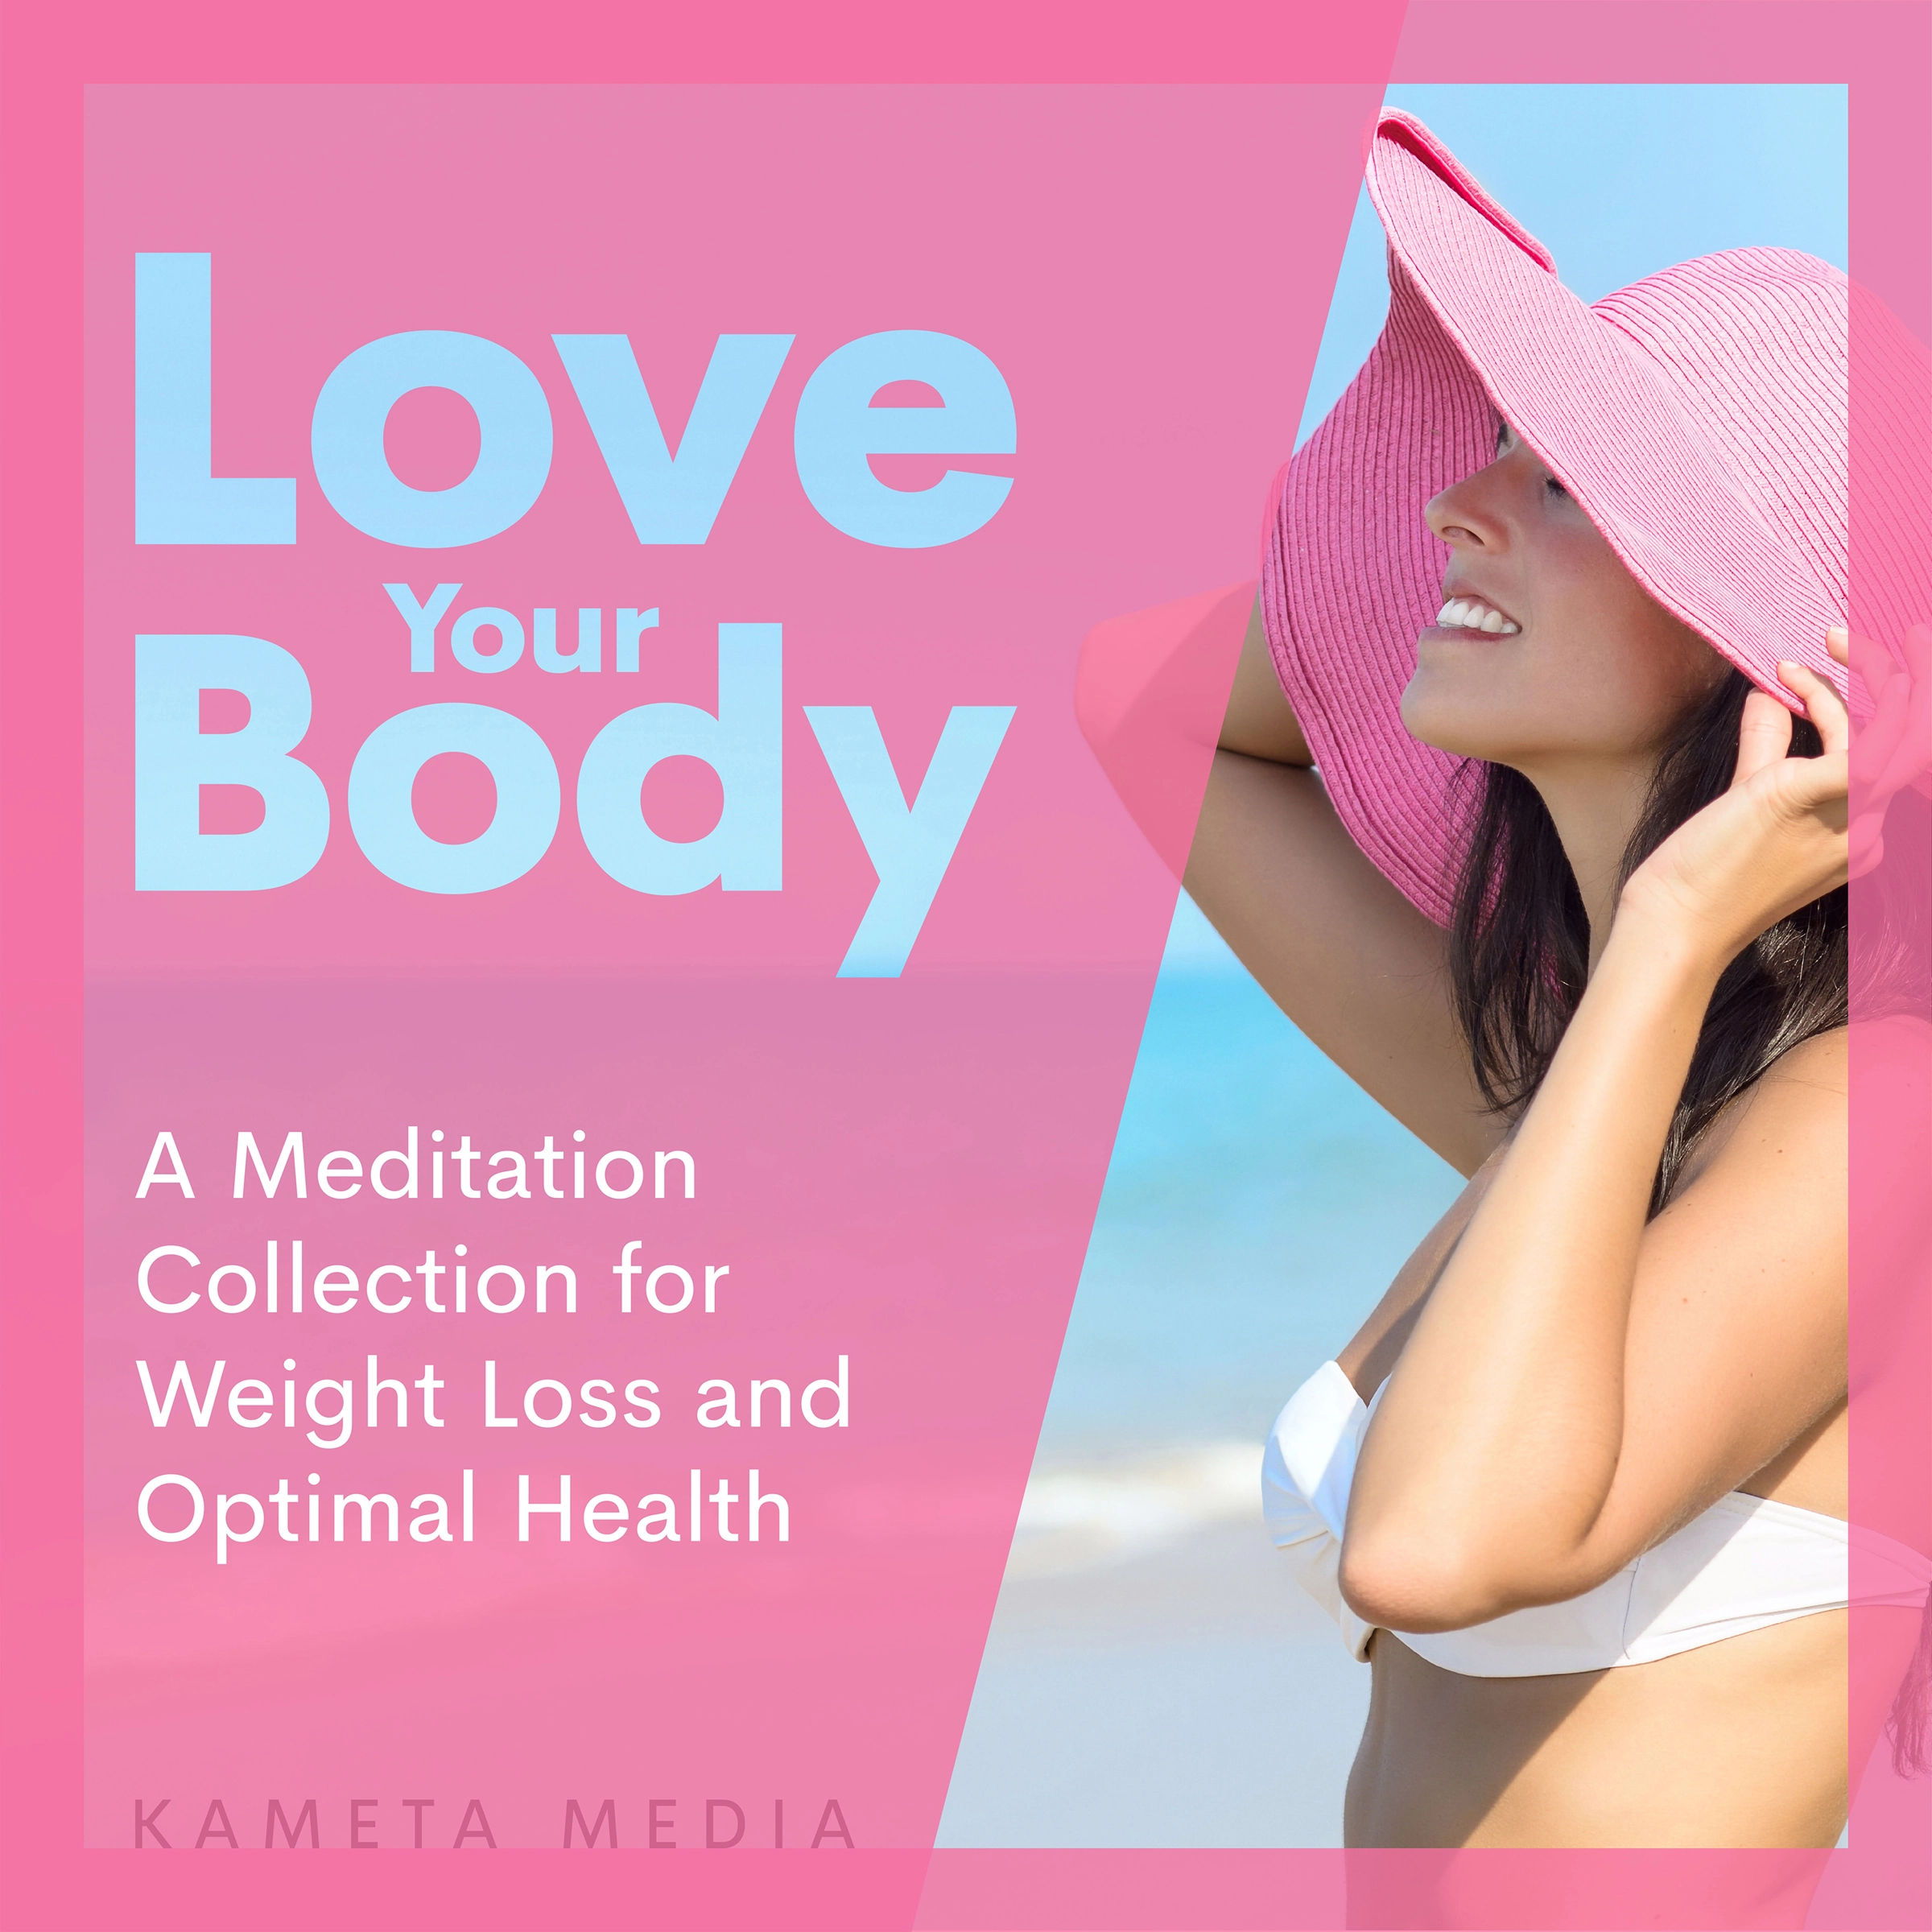 Love Your Body: A Meditation Collection for Weight Loss and Optimal Health Audiobook by Kameta Media